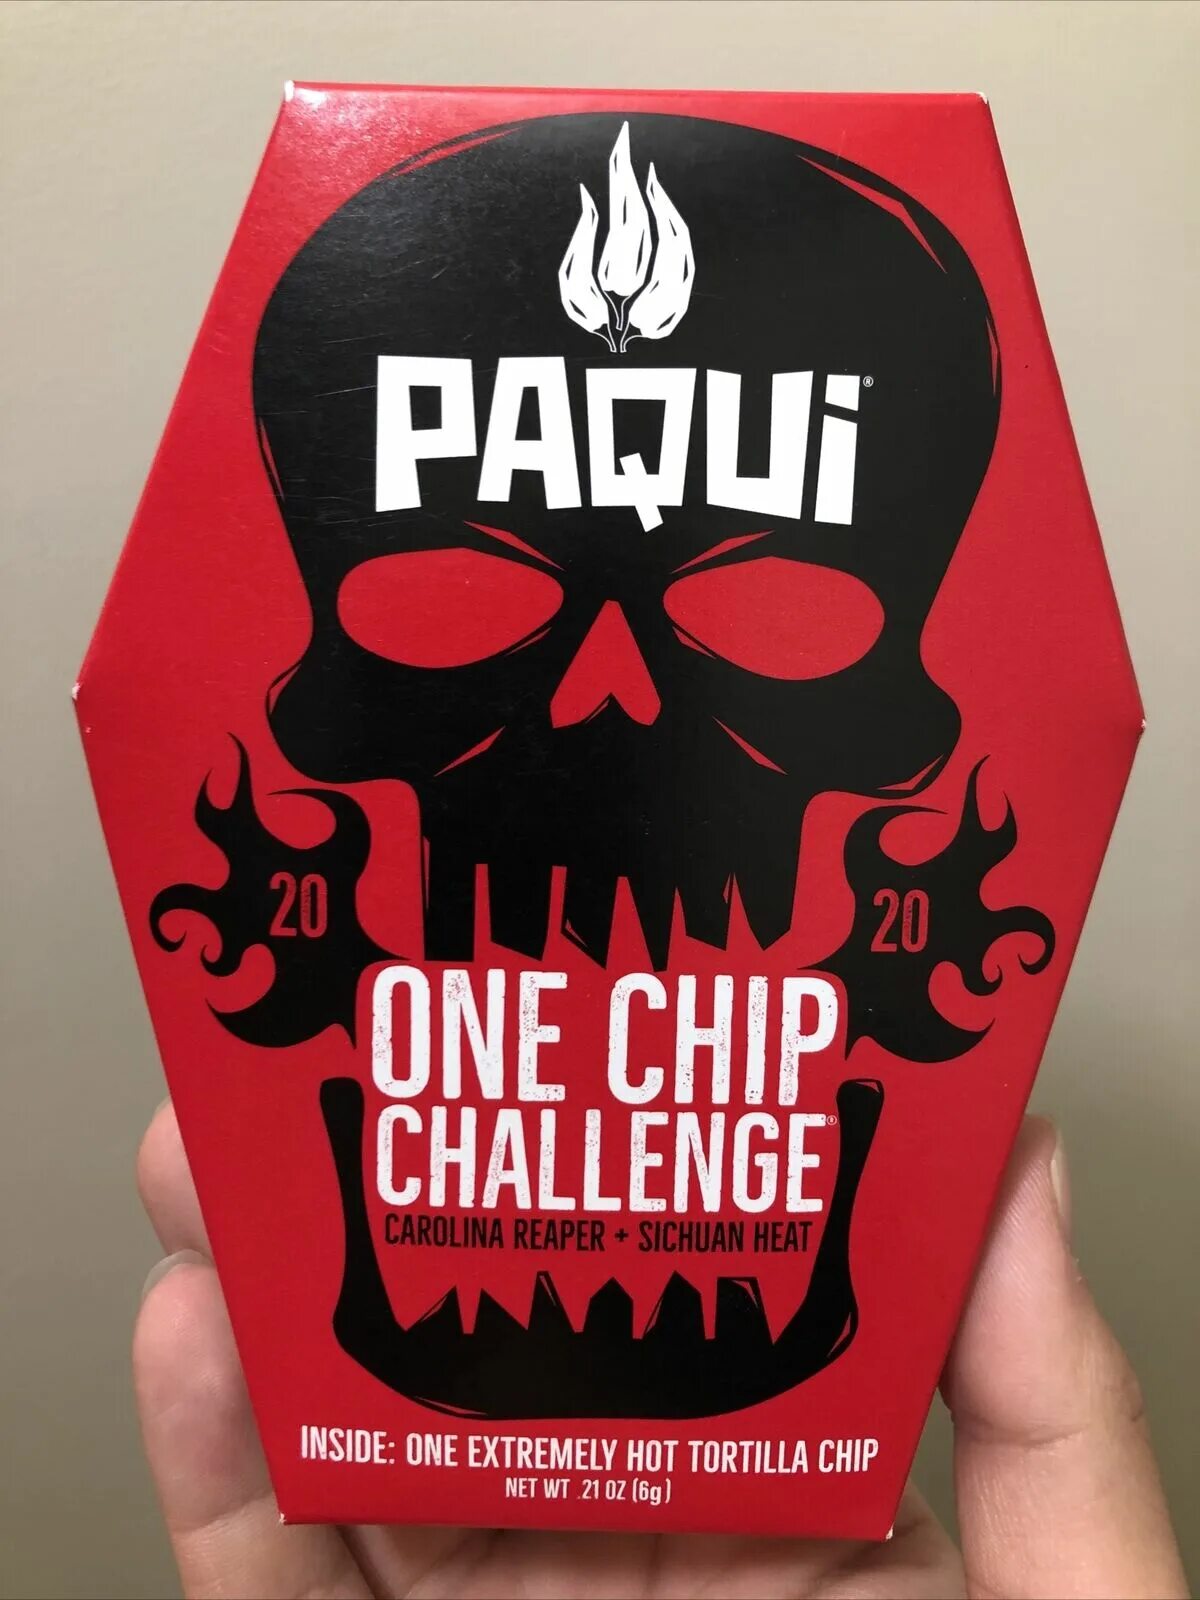 Paqui one chip. One Chip Challenge. One Chip Challenge купить. One Spicy Chip Challenge.